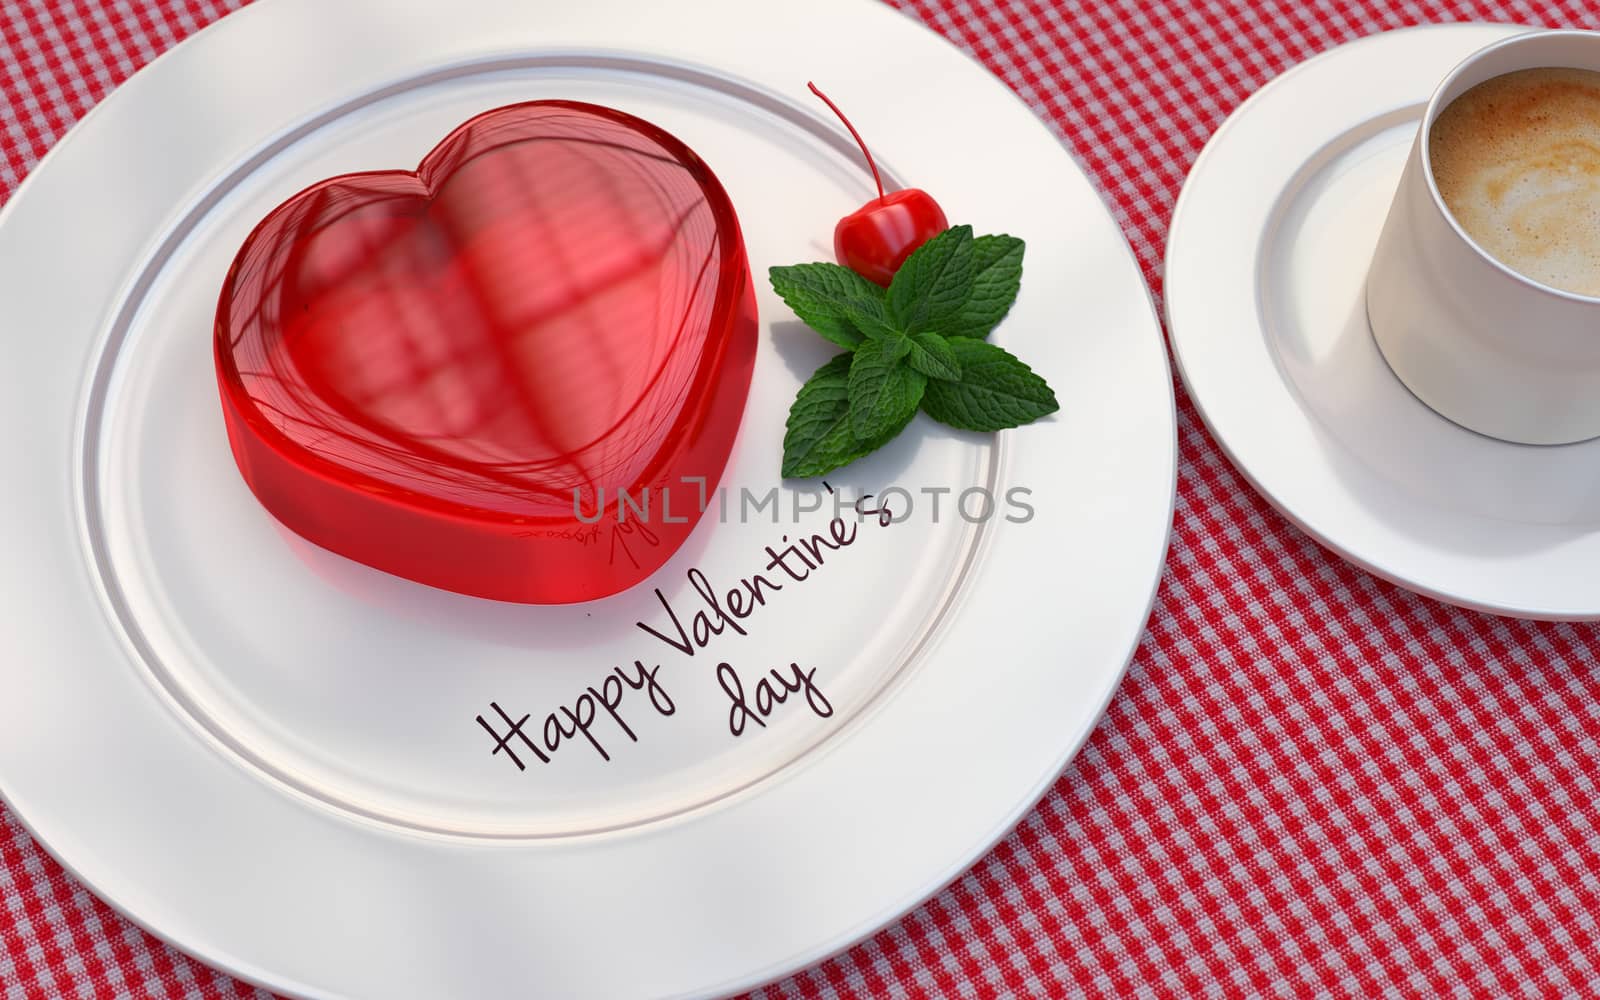 Jelly hearts for Valentines Day by Barbraford